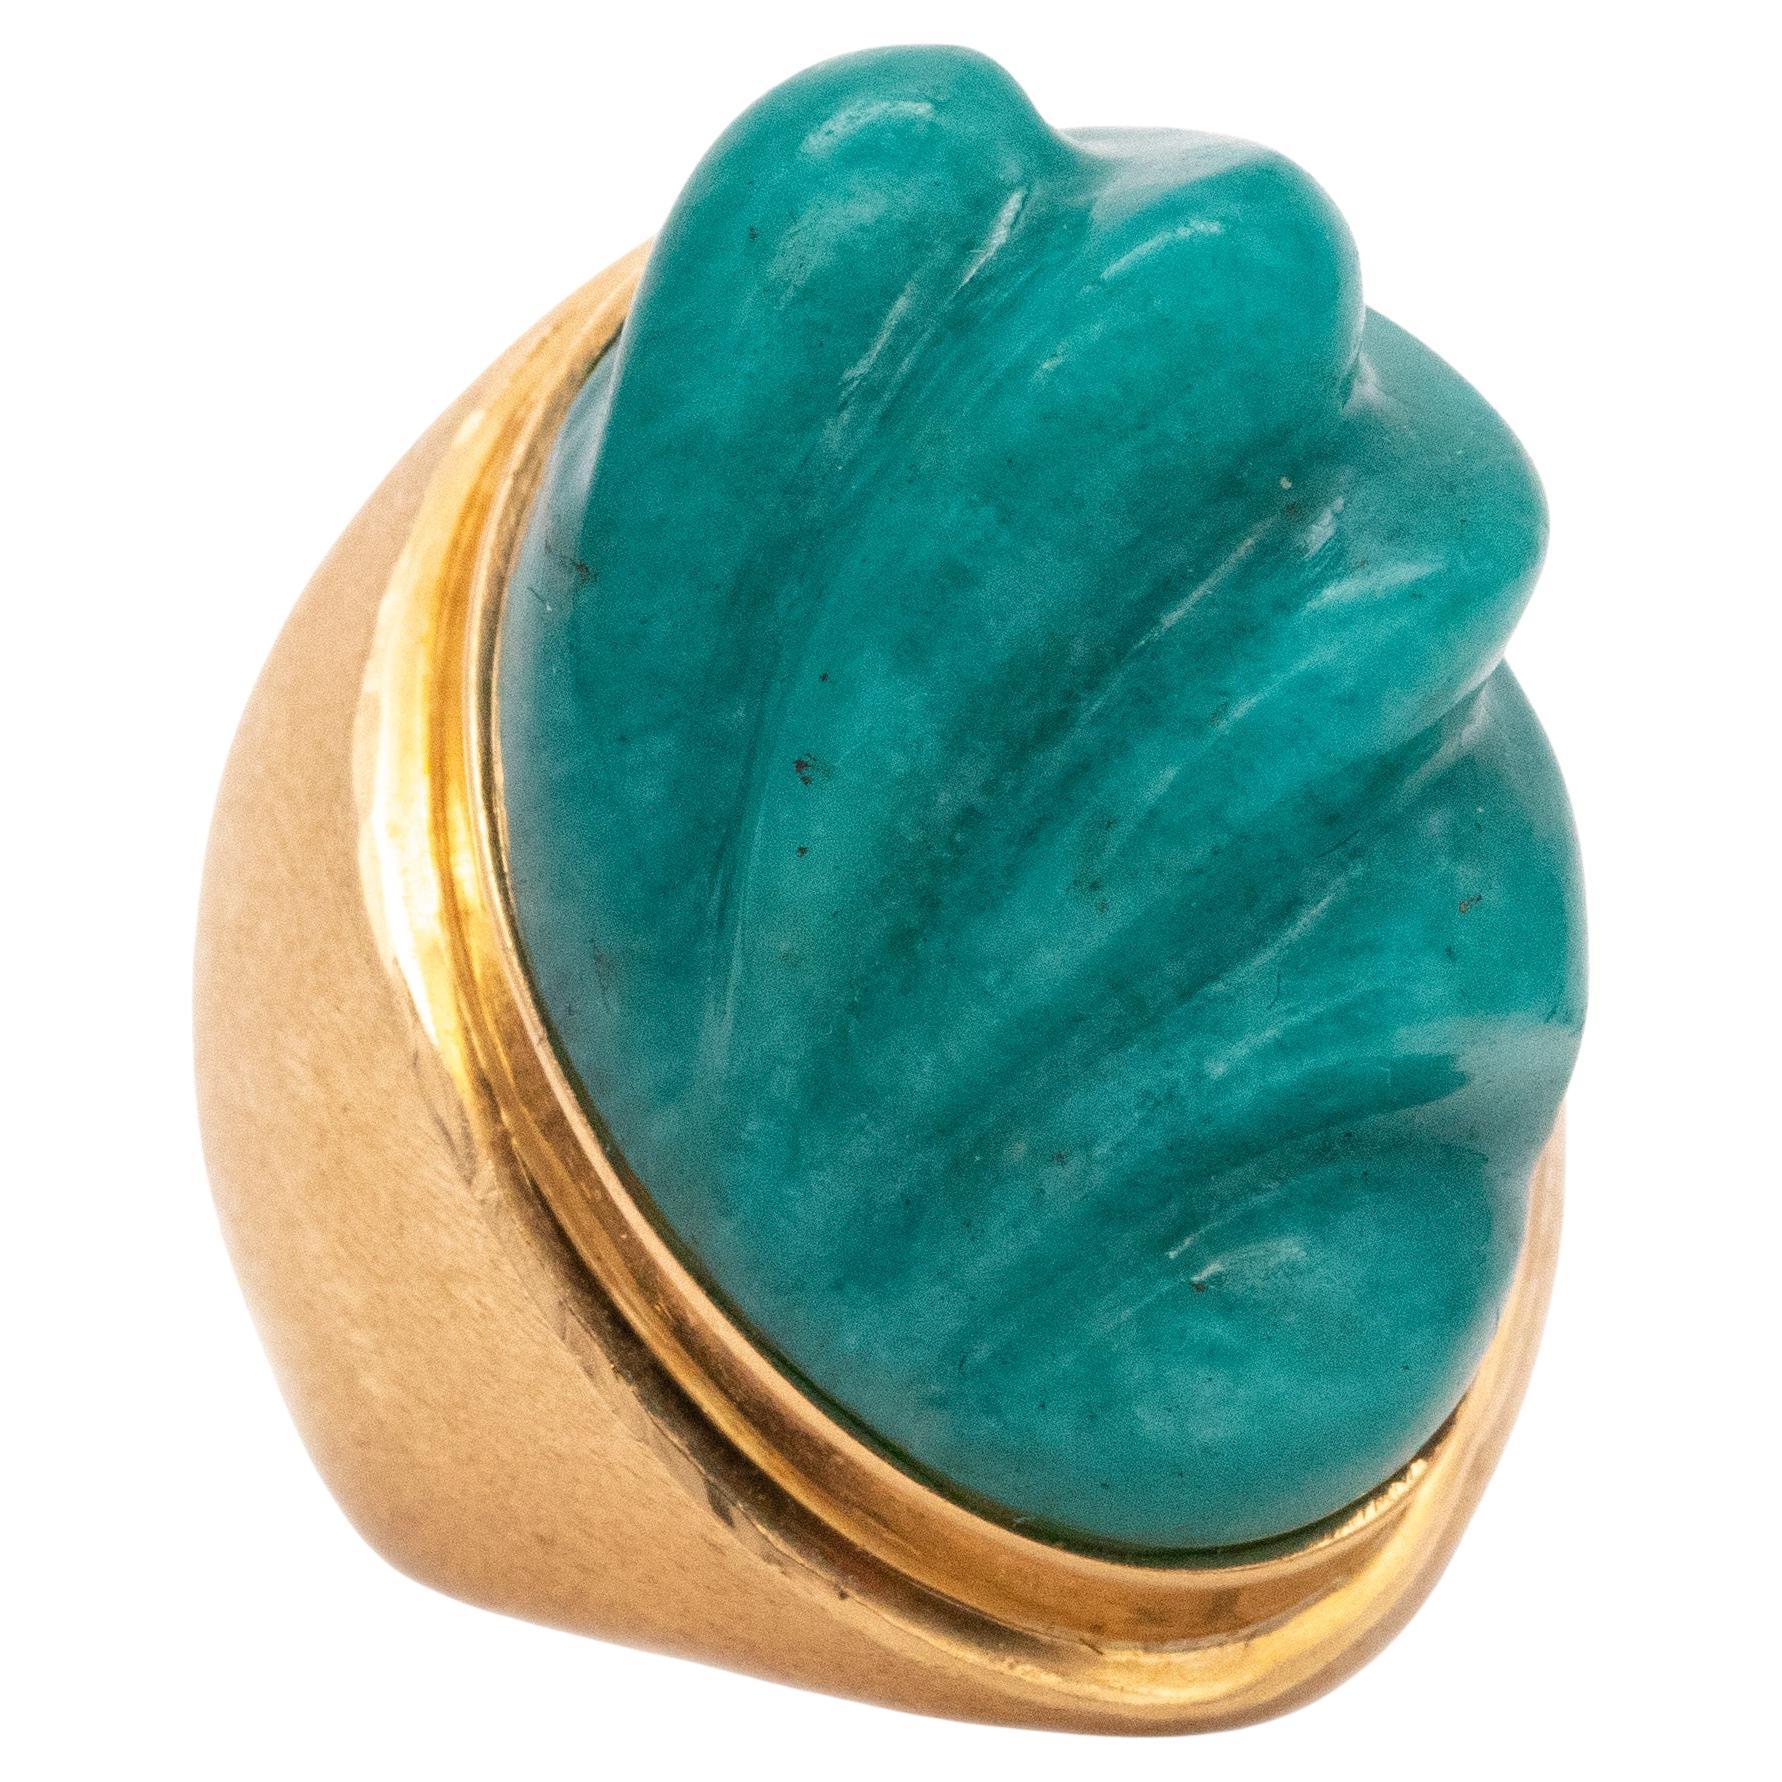 Burle Marx 1960 Brazil 18kt Yellow Gold Forma Livre Ring with 38 Ct in Amazonite